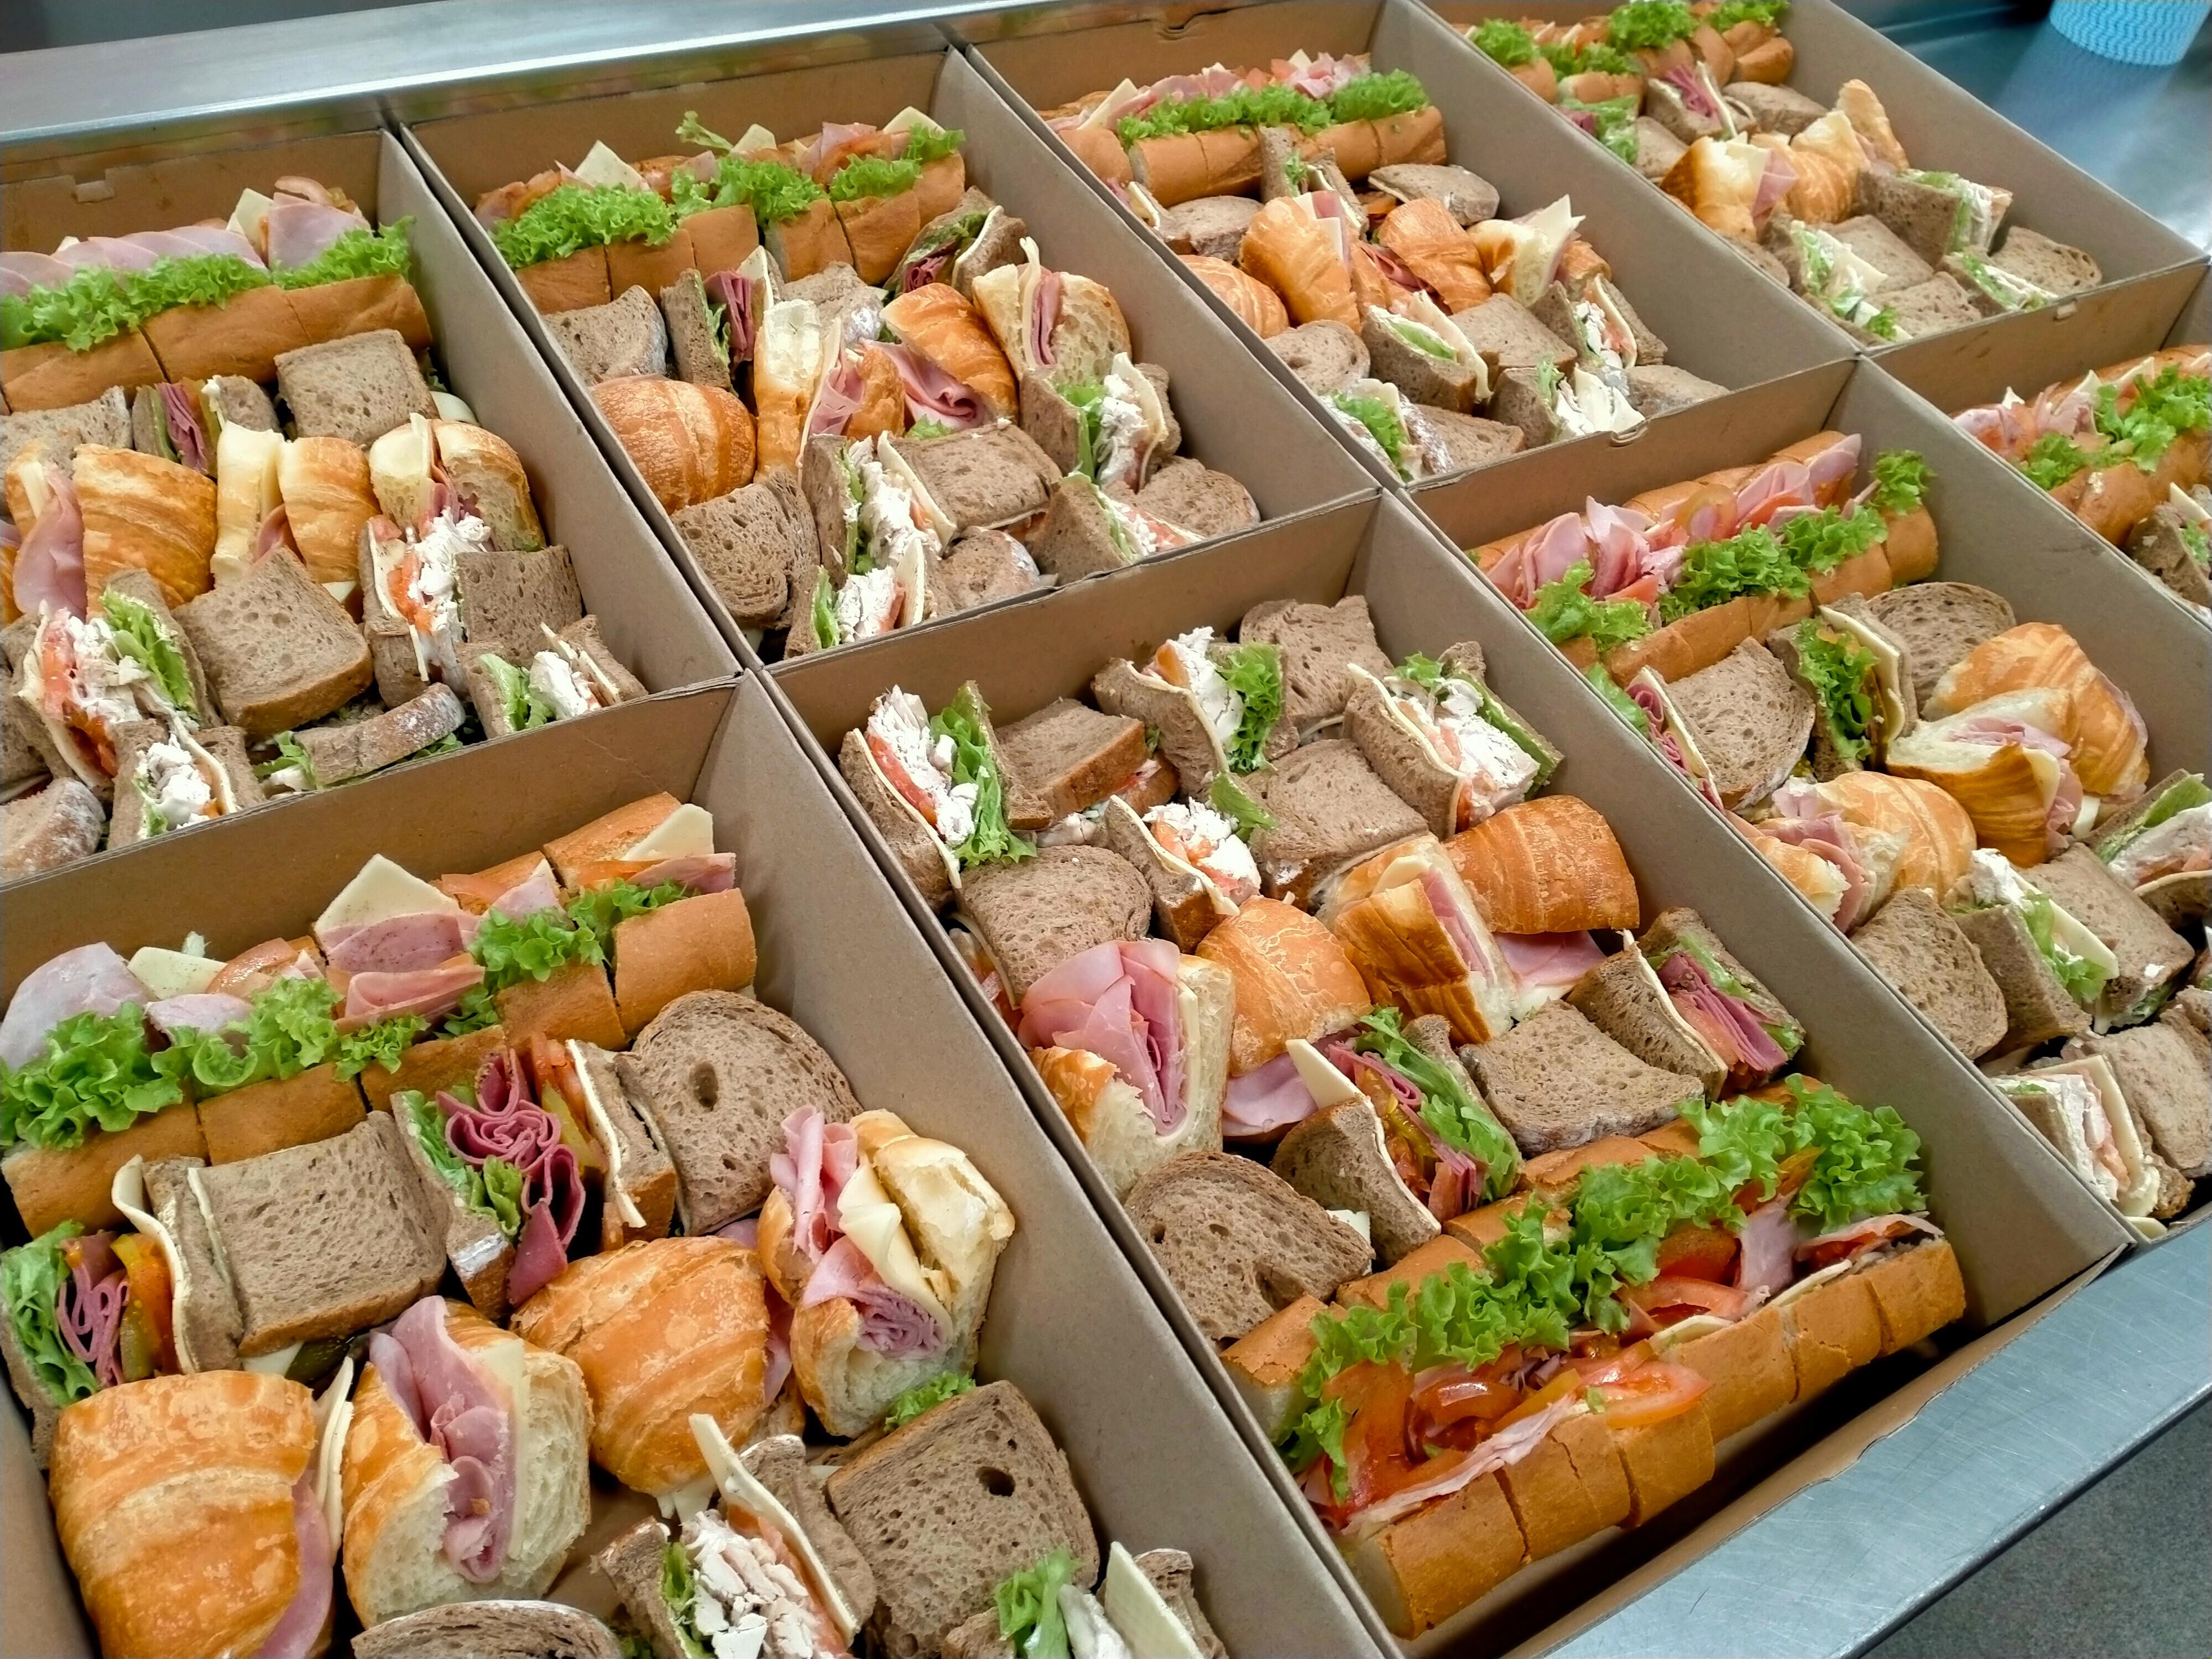 Mixed sandwich platters that I made this morning at 3am for a catering